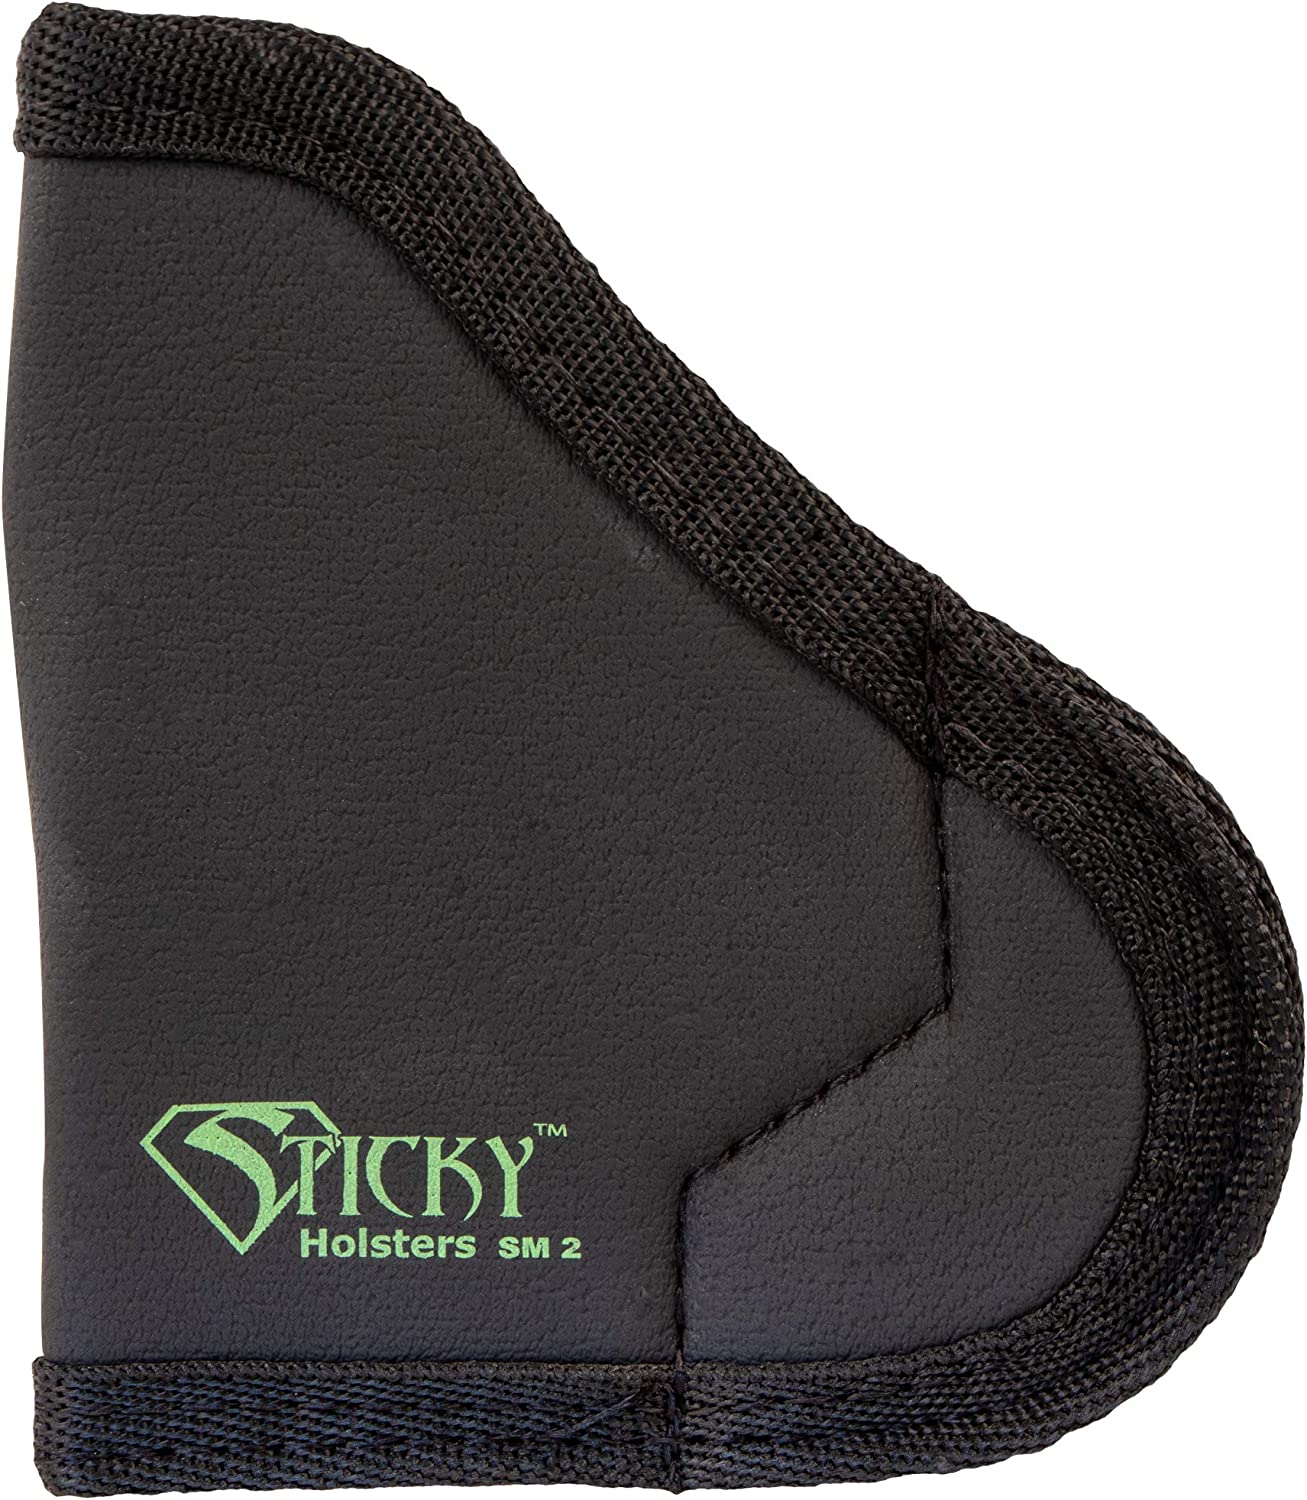 Sticky Holsters Sm2 - Fits Pocket 380'S Up To 2.5